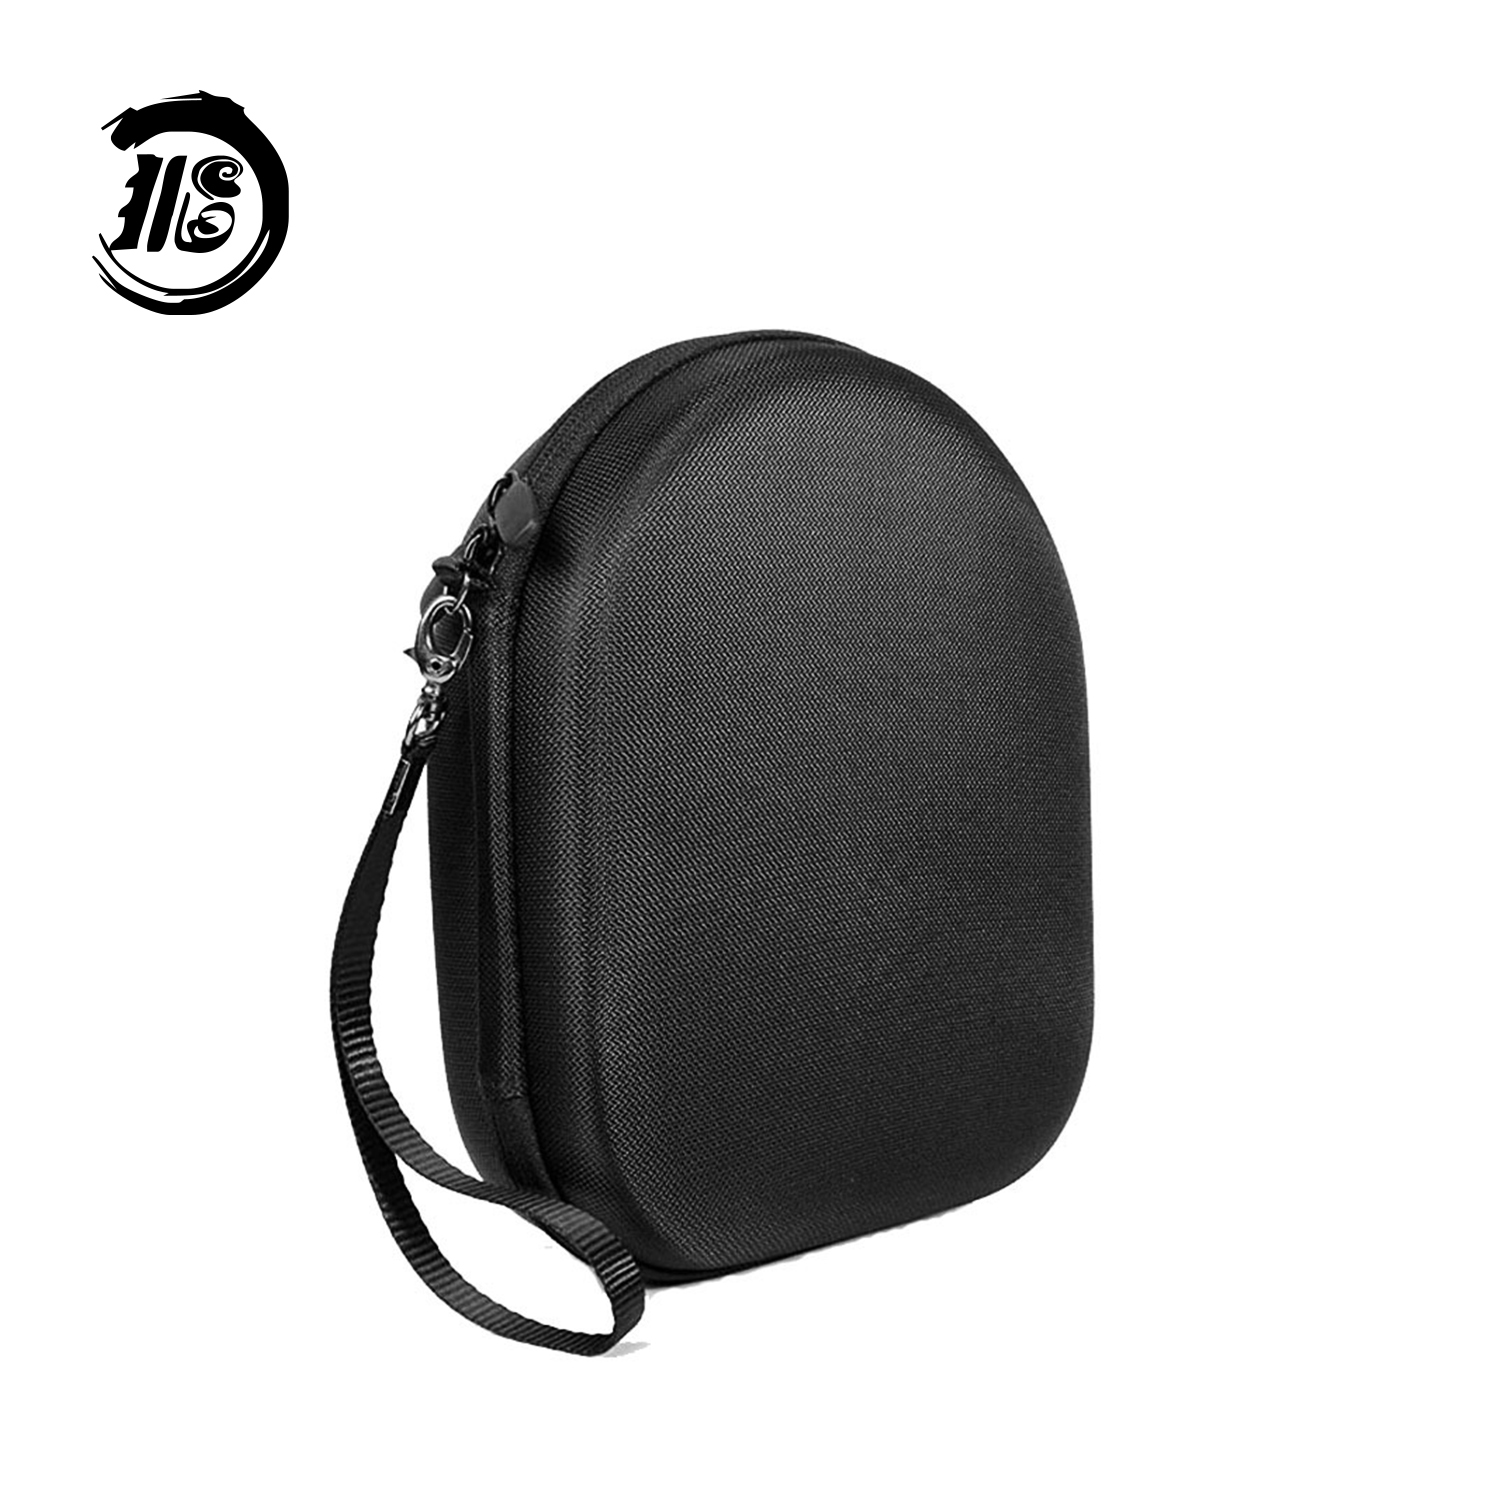 Travel EVA Case Hard Shell Protective Carrying Bag for Headphone and Parts